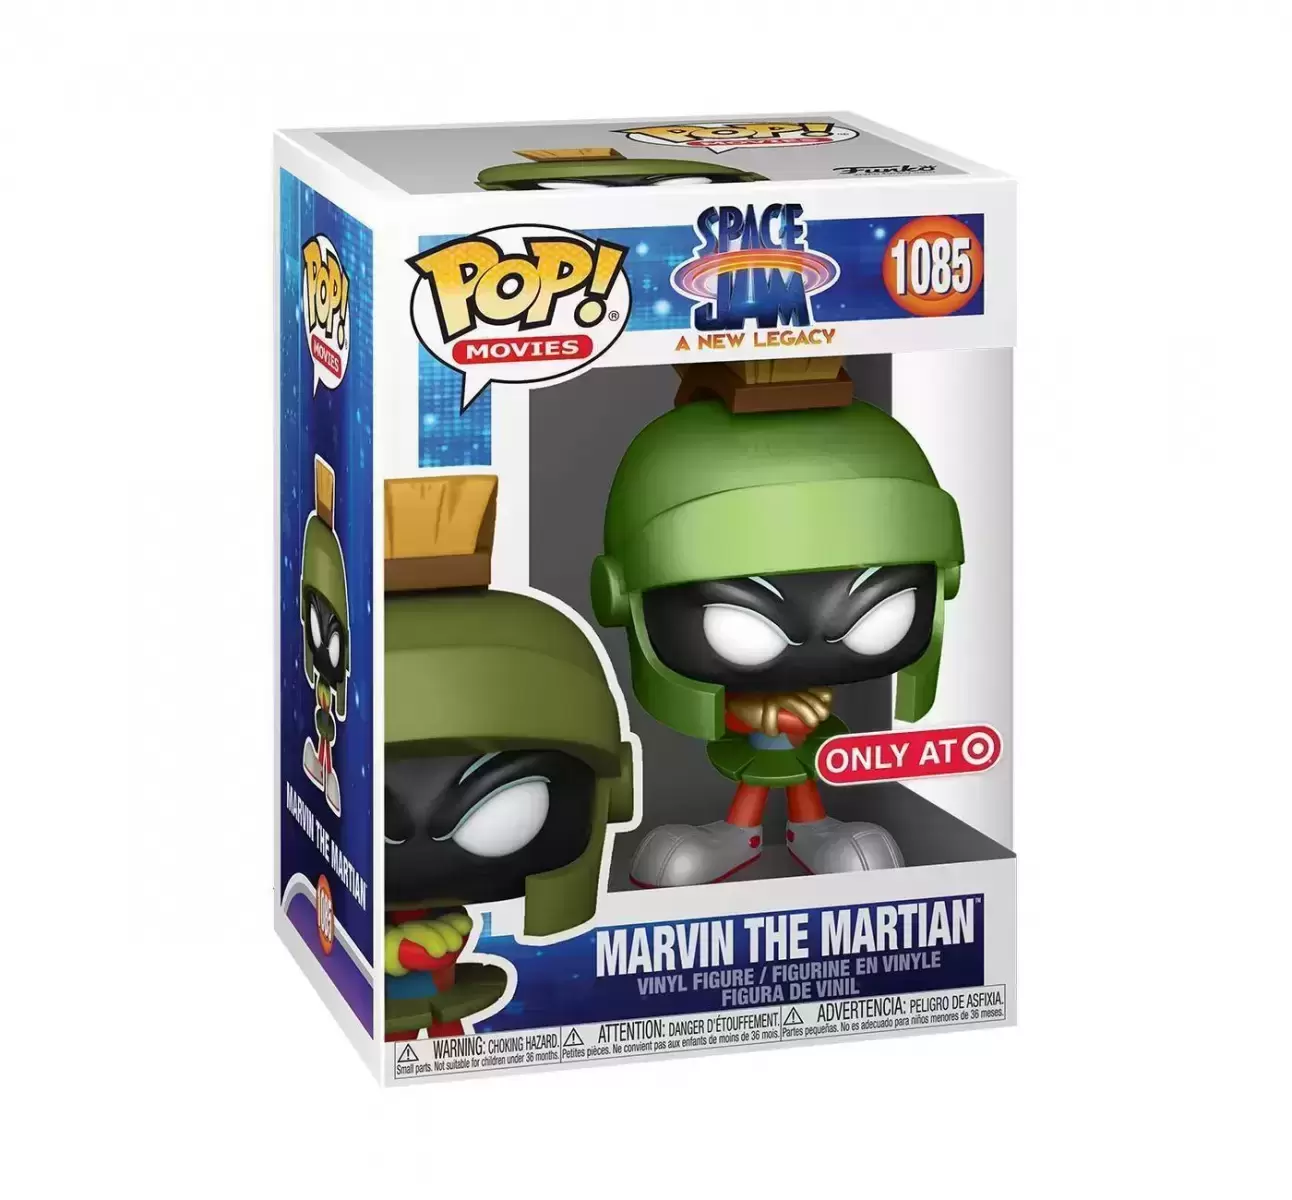 POP! Movies - Space Jam A New Legacy - Marvin The Martian Metallic